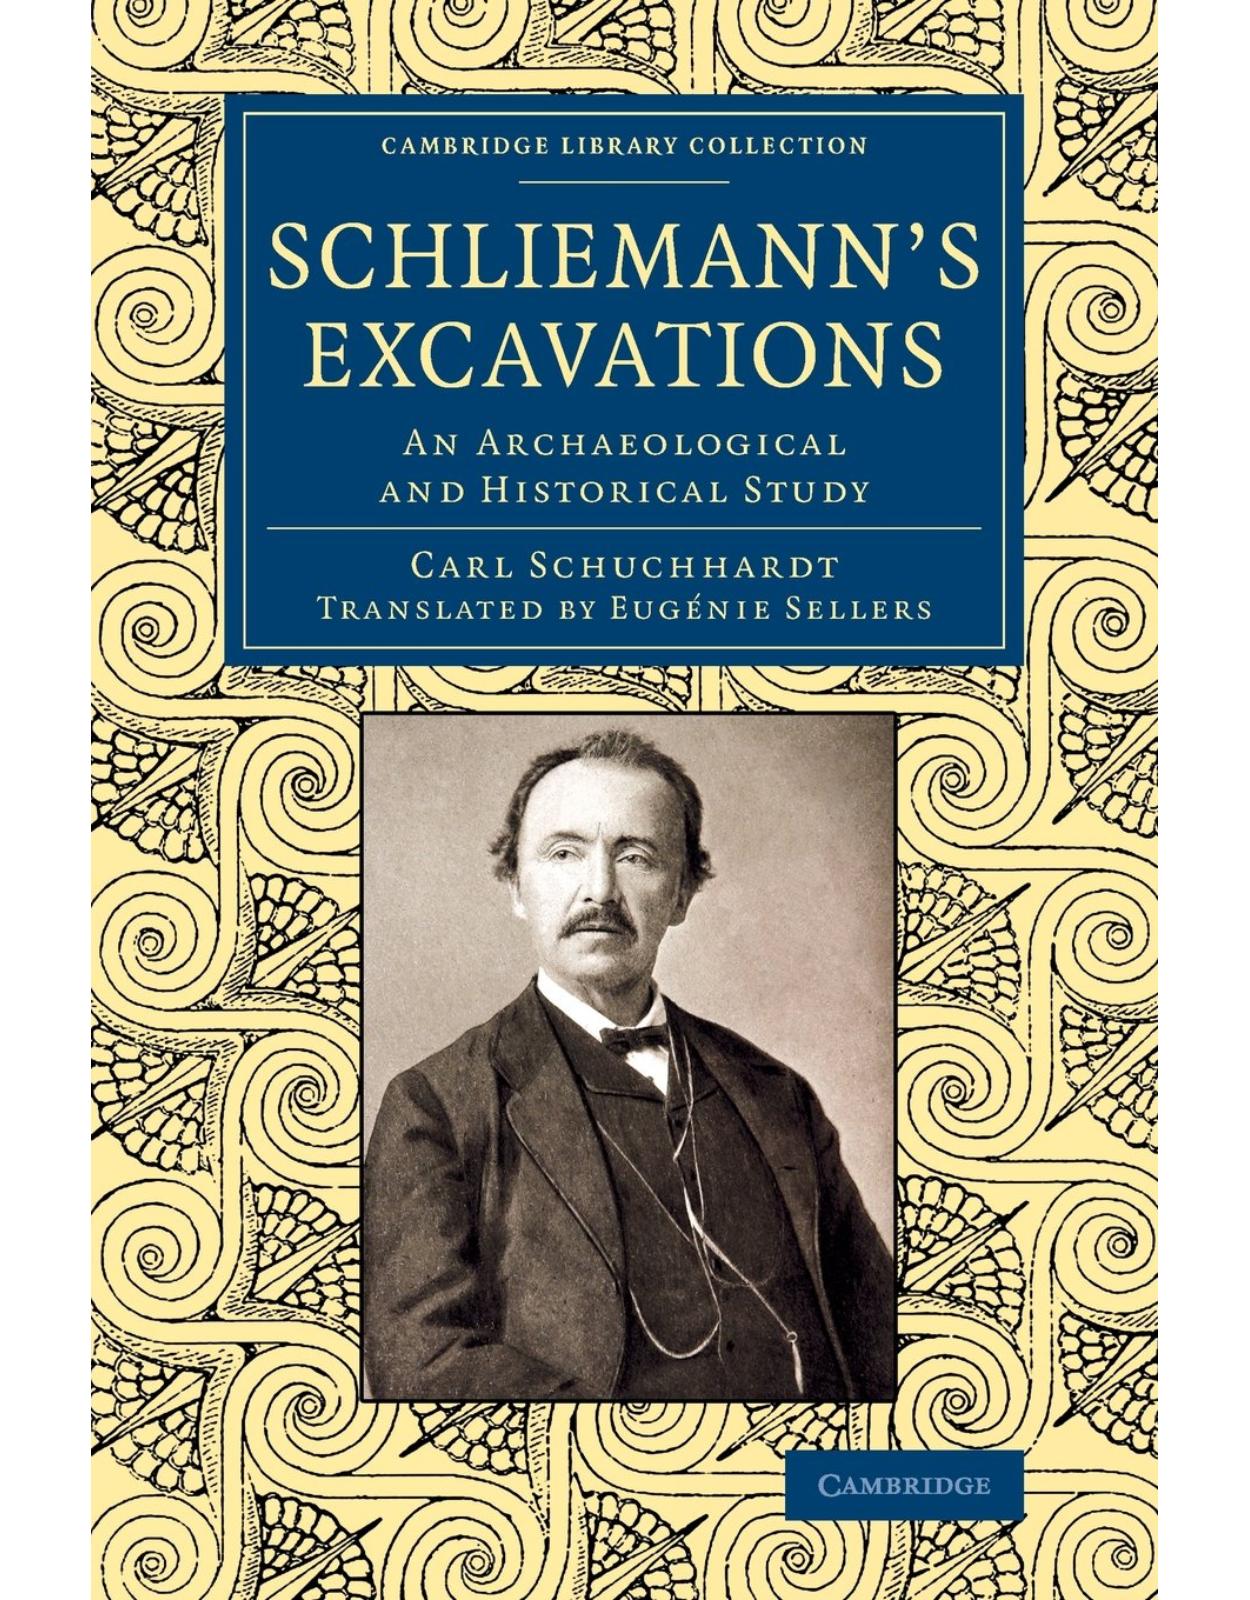 Schliemann's Excavations: An Archaeological and Historical Study (Cambridge Library Collection - Archaeology)